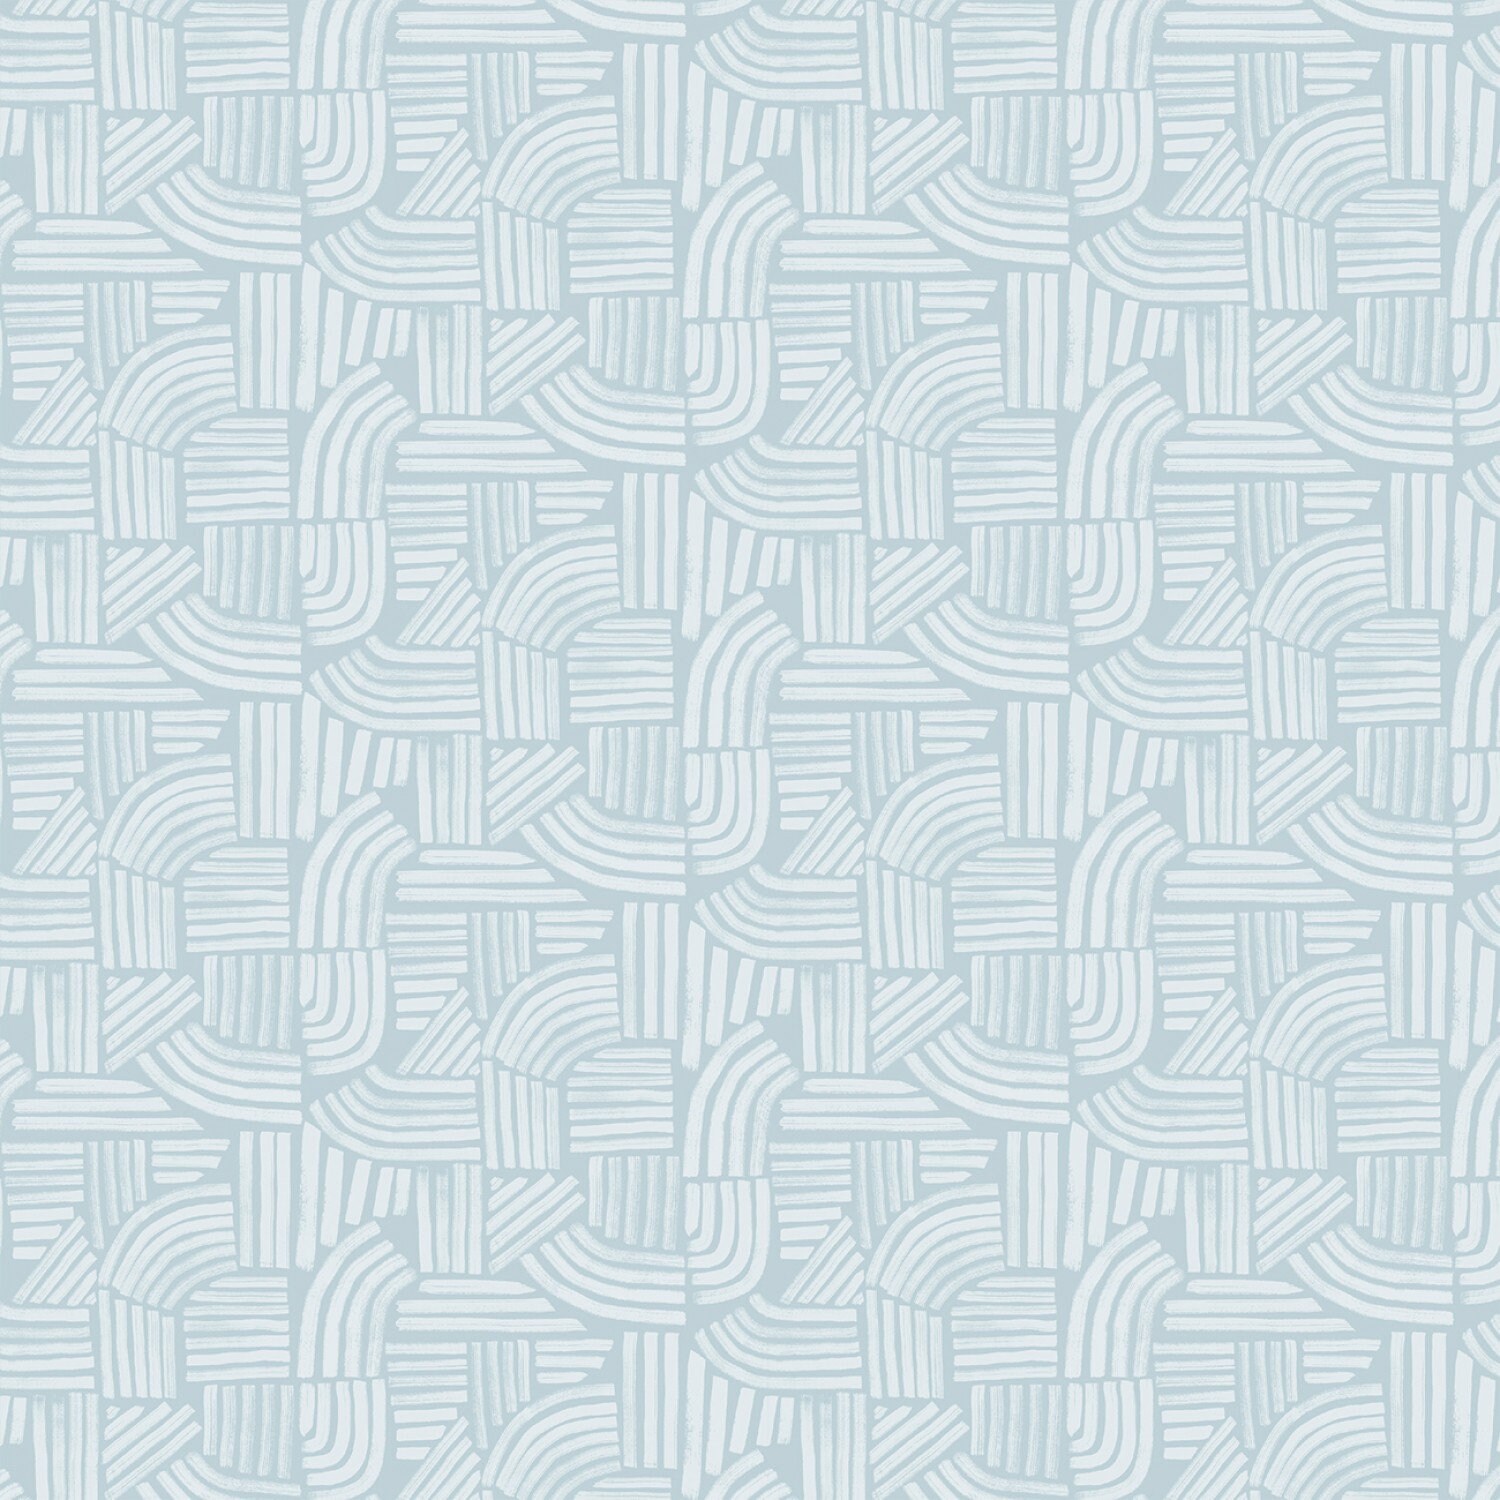 Blender Cotton Fabric by Yard Wildflower Linea Ice Blue -